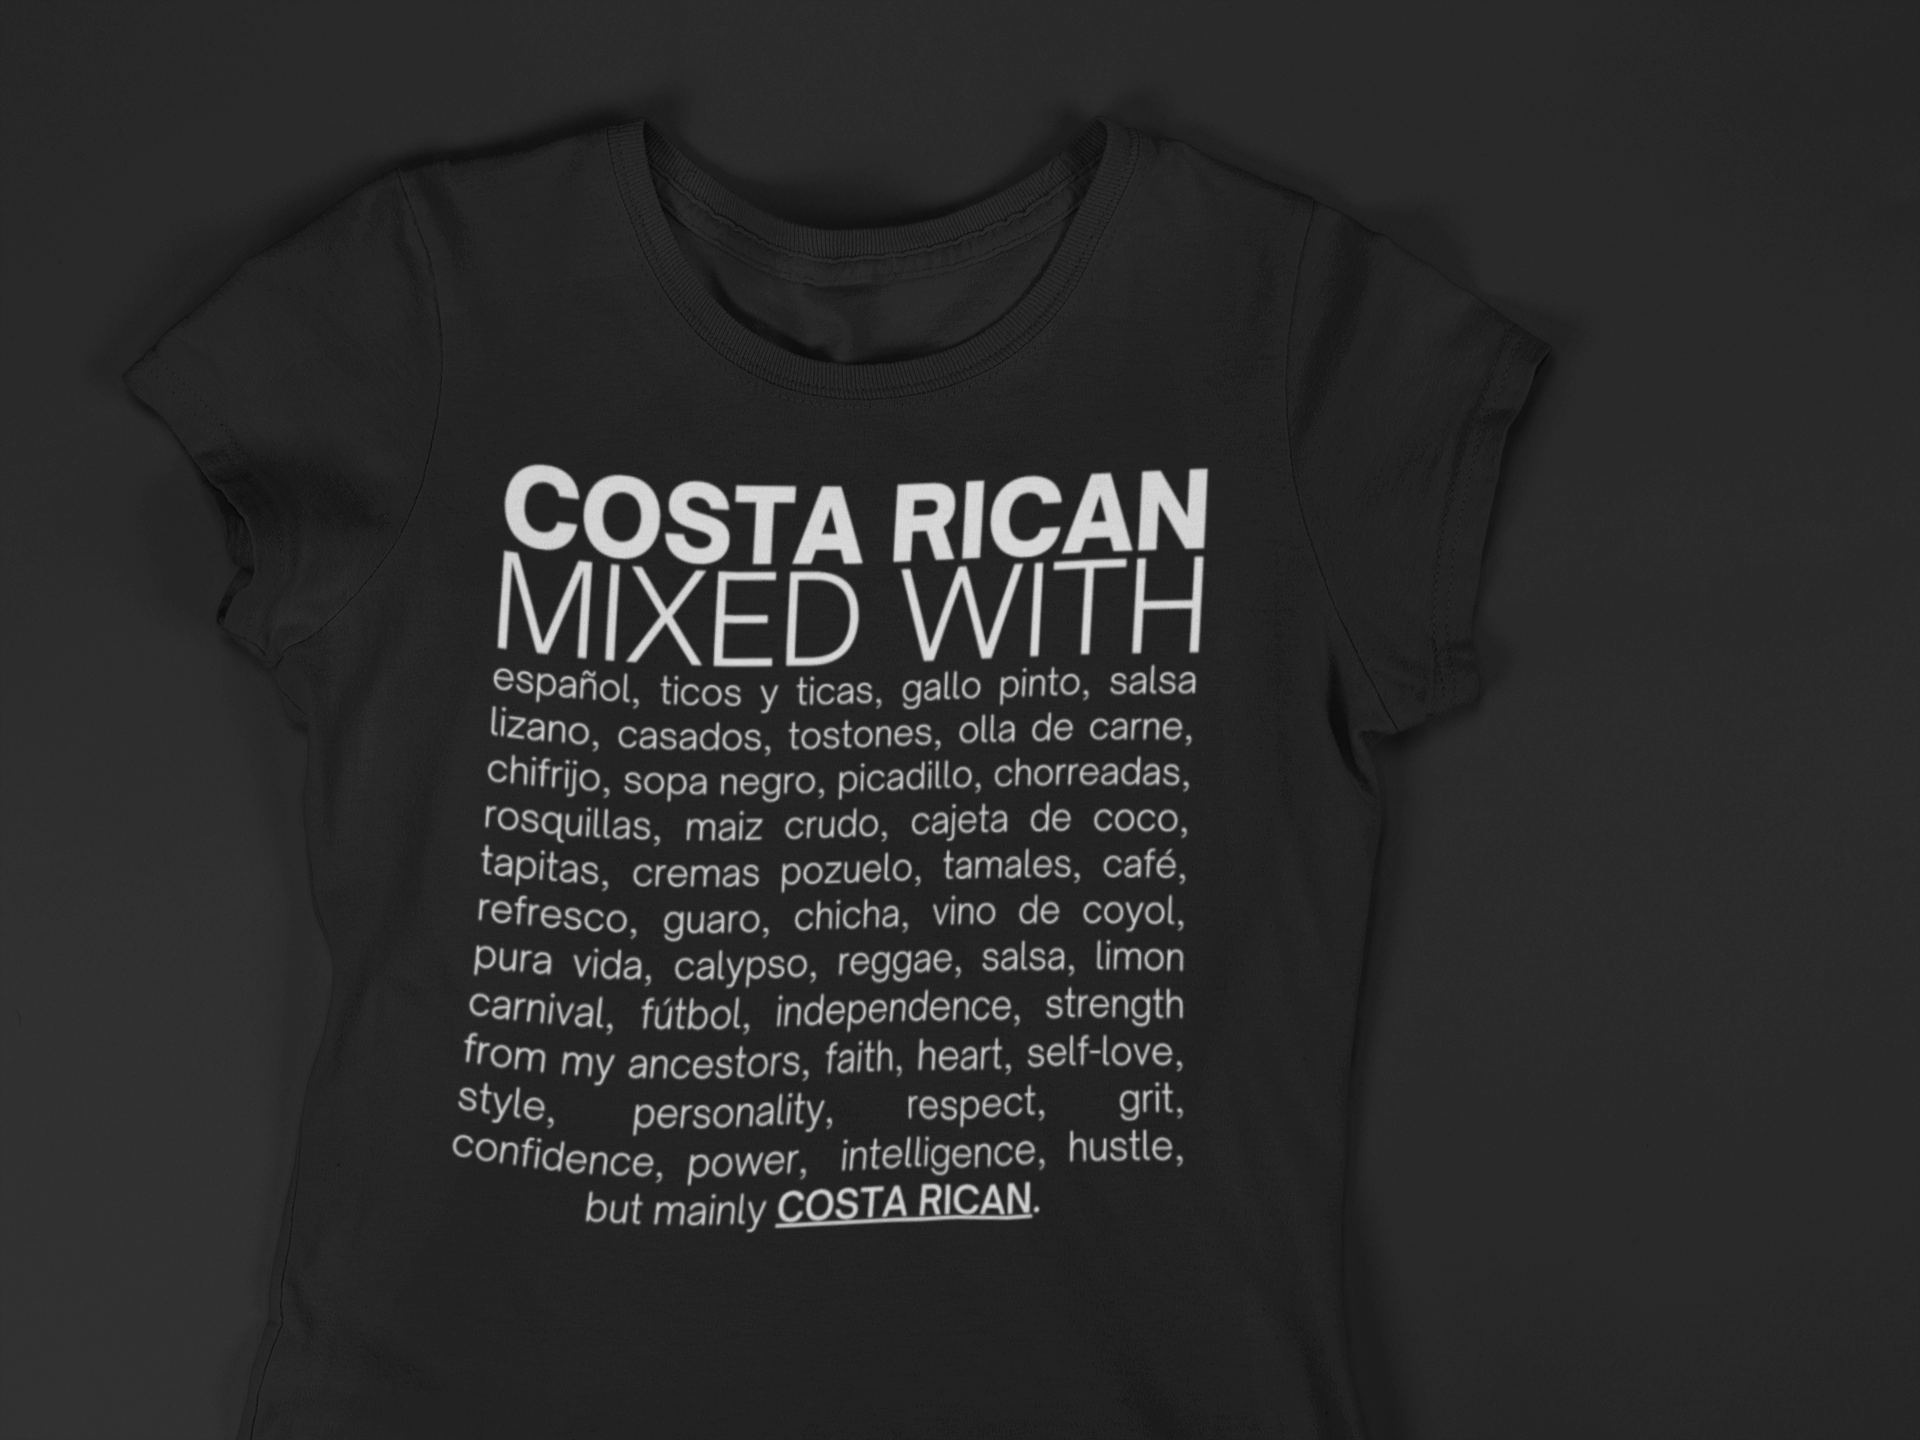 Costa Rican Mixed With "Gallo Pinto & Chifrijo"